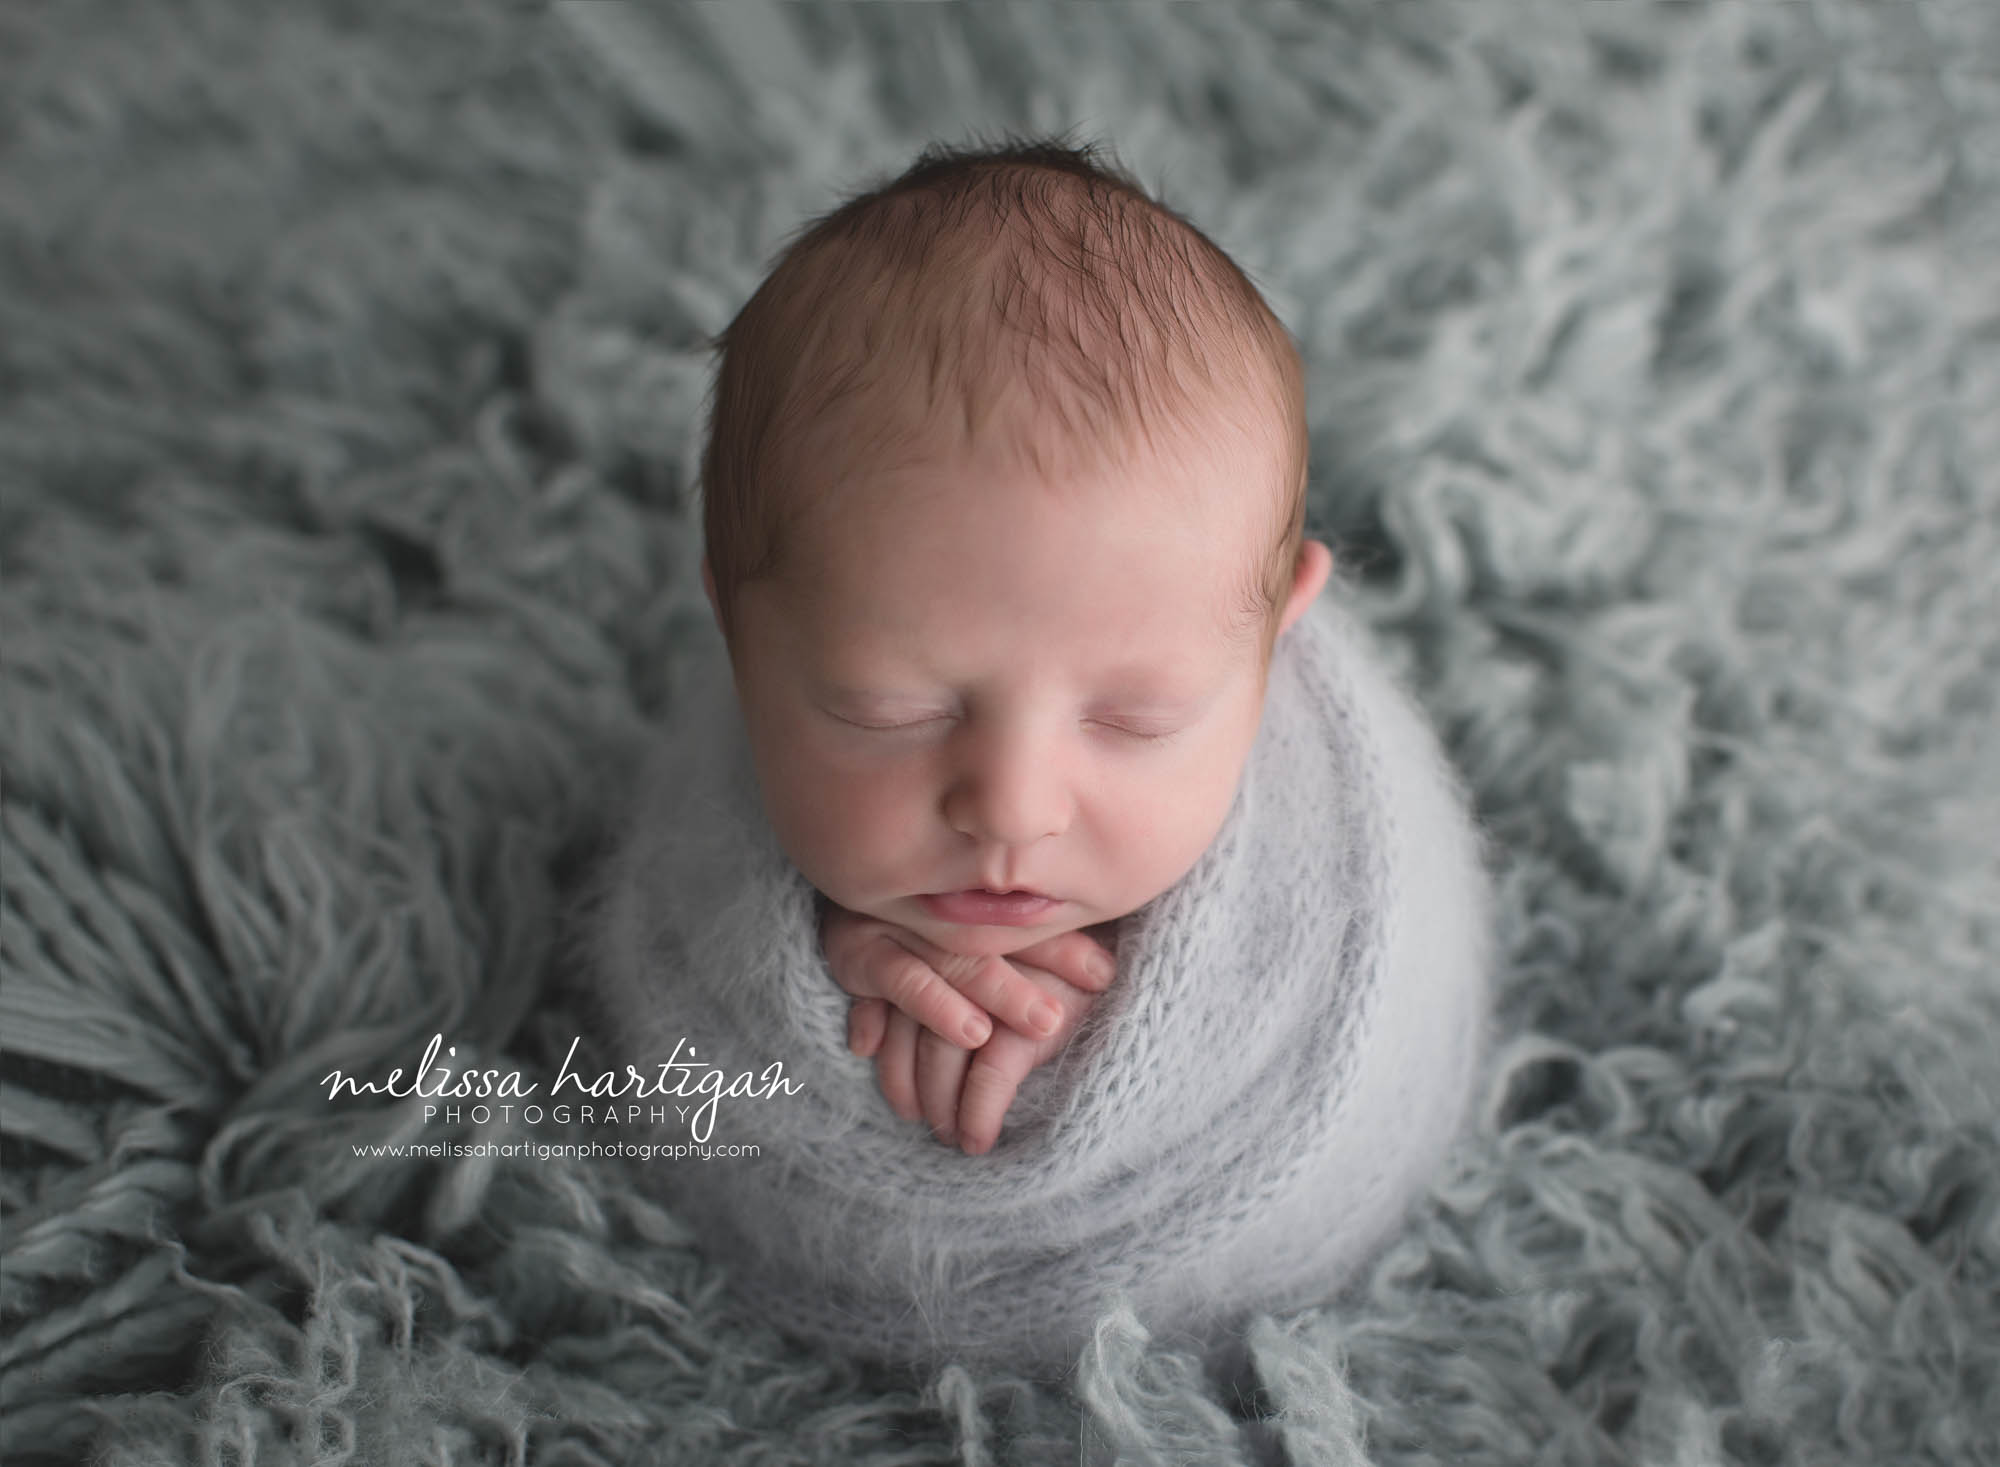 Melissa Hartigan Photography Coventry CT Newborn & Maternity Photographer Coventry CT Maternity Newborn Session Chase in gray wrap sleeping on gray flokati